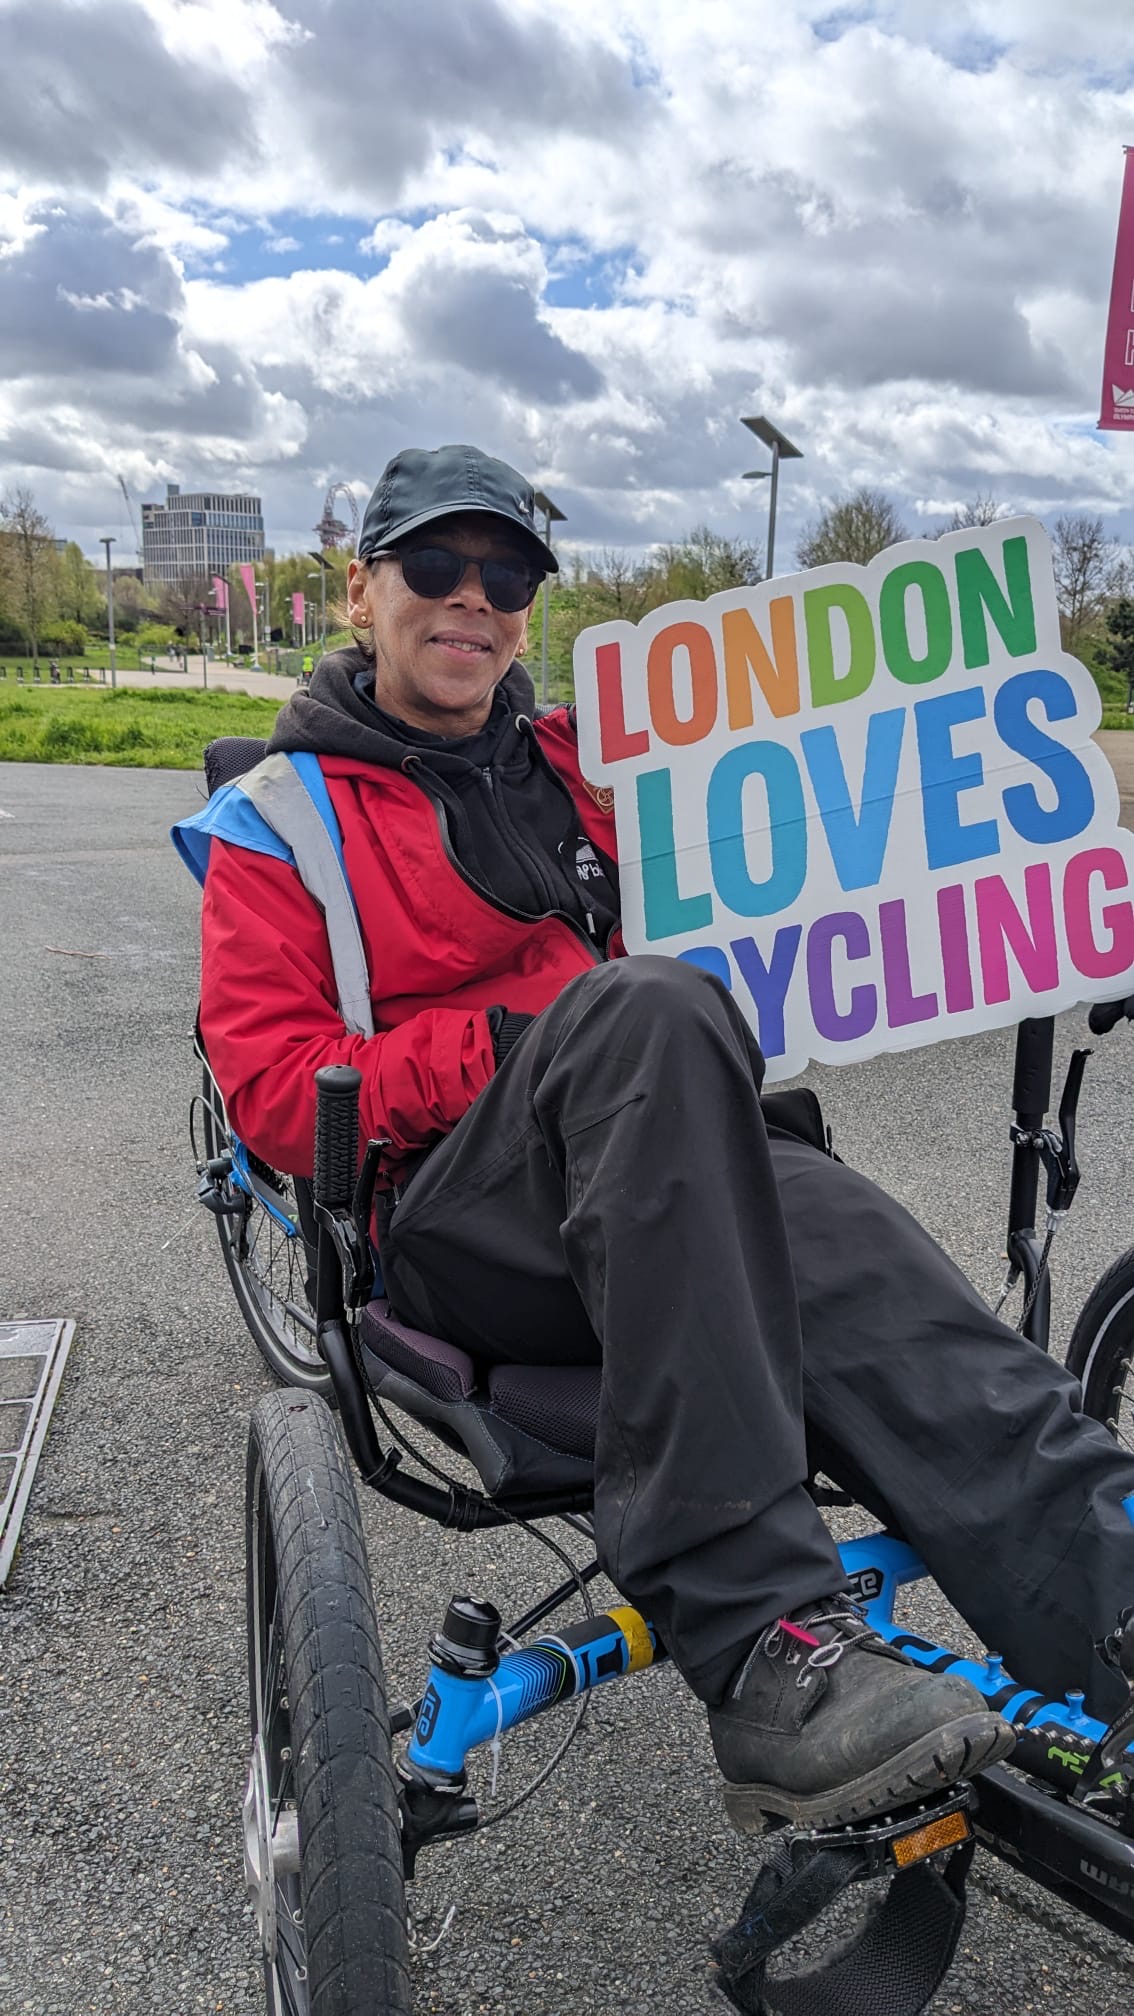 Person on cycle holding up London Loves Cycling sign